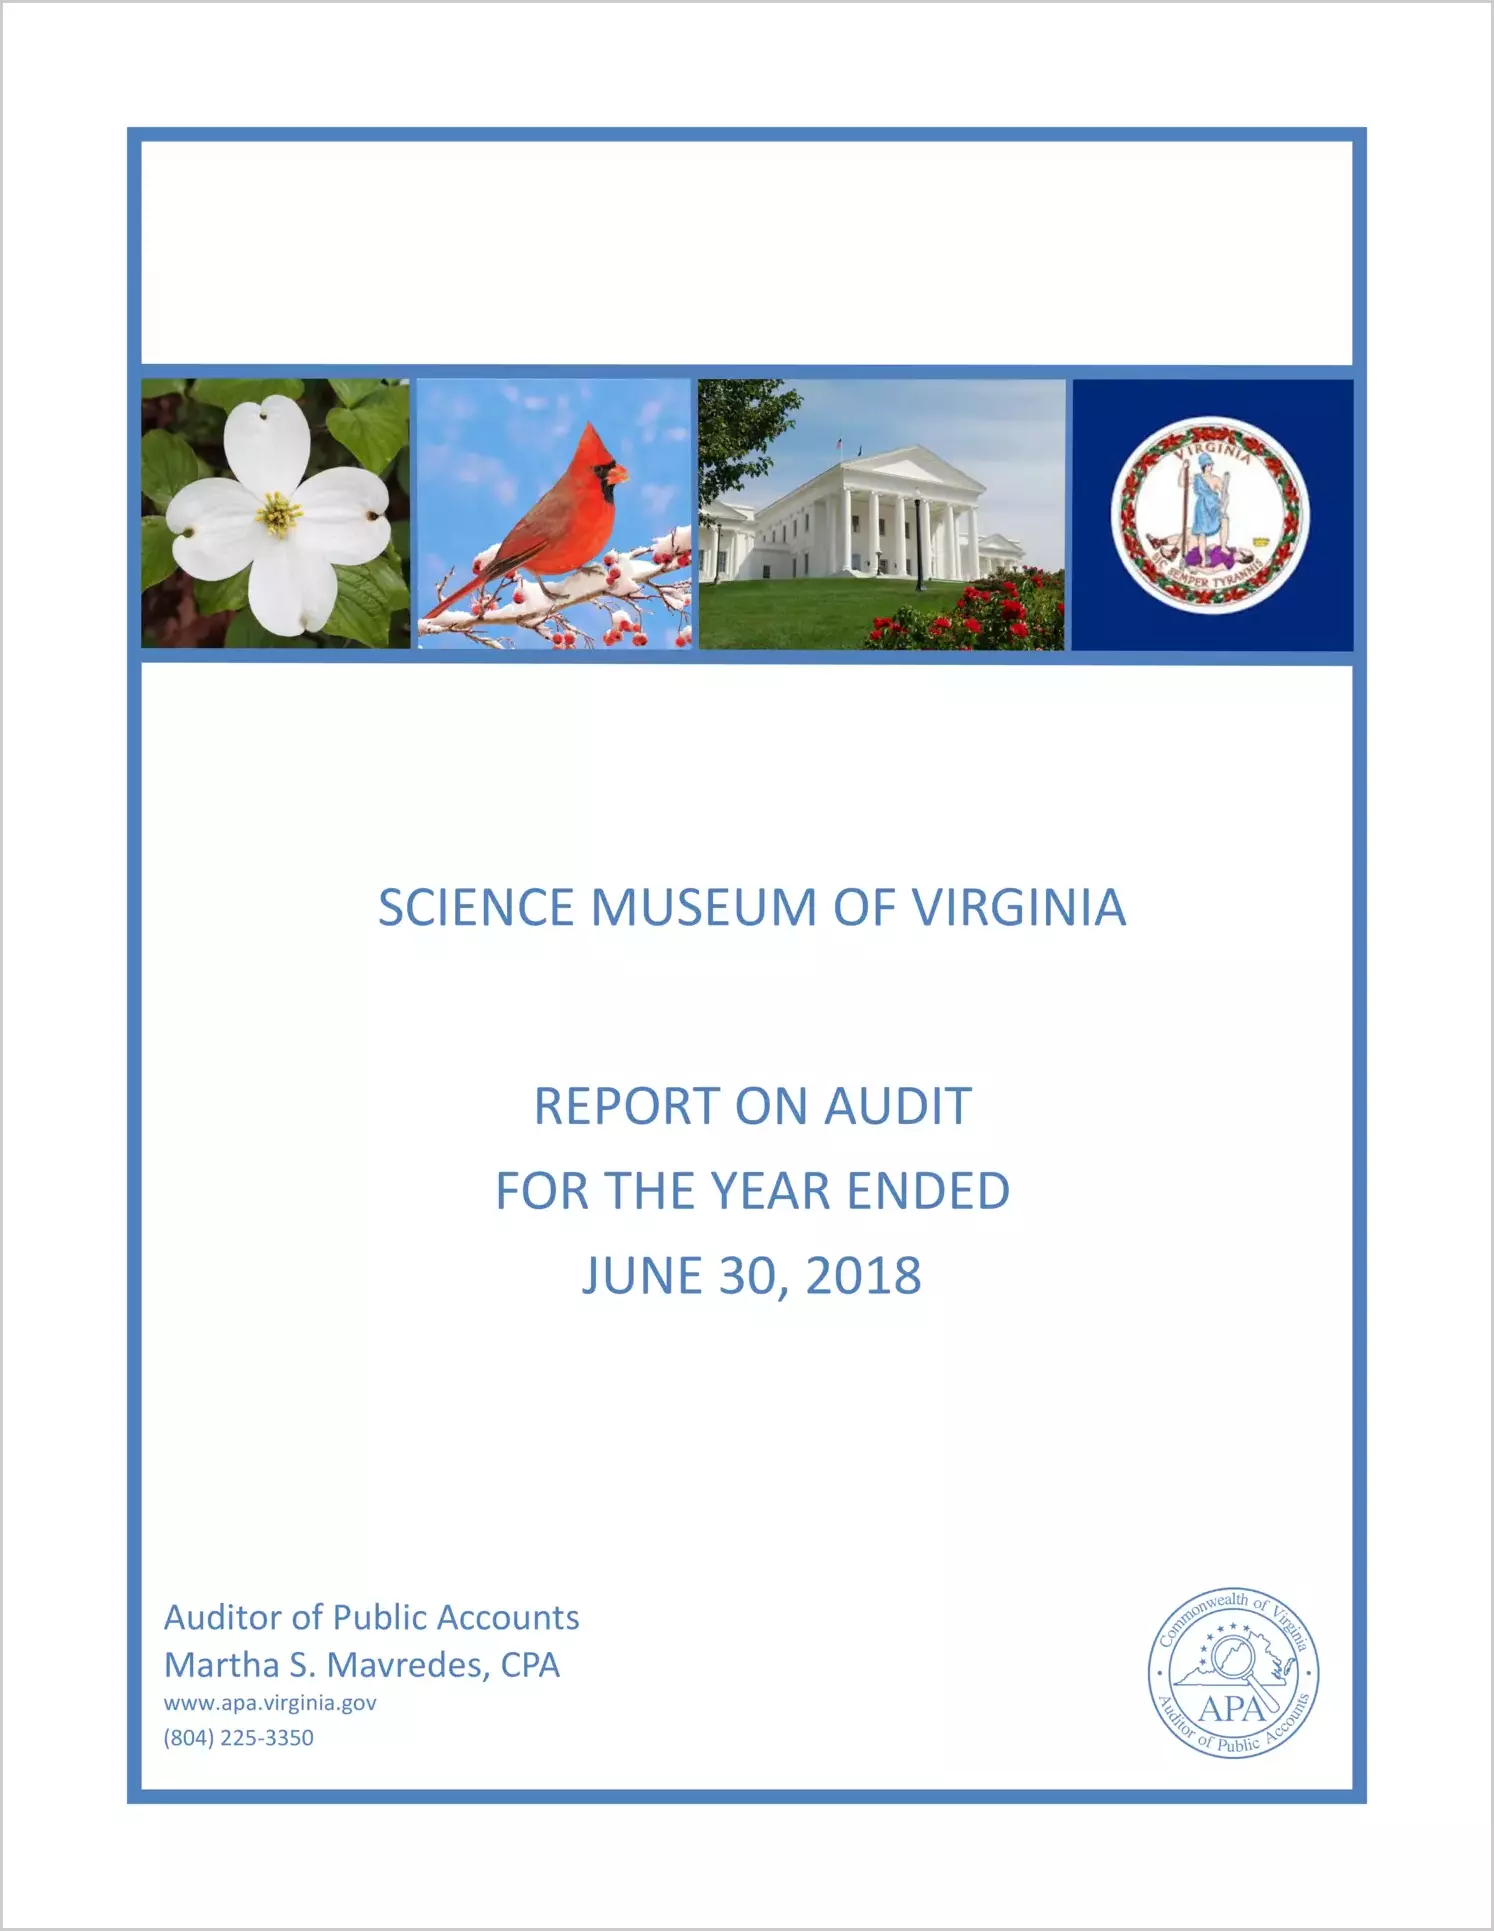 Science Museum of Virginia for the year ended June 30, 2018